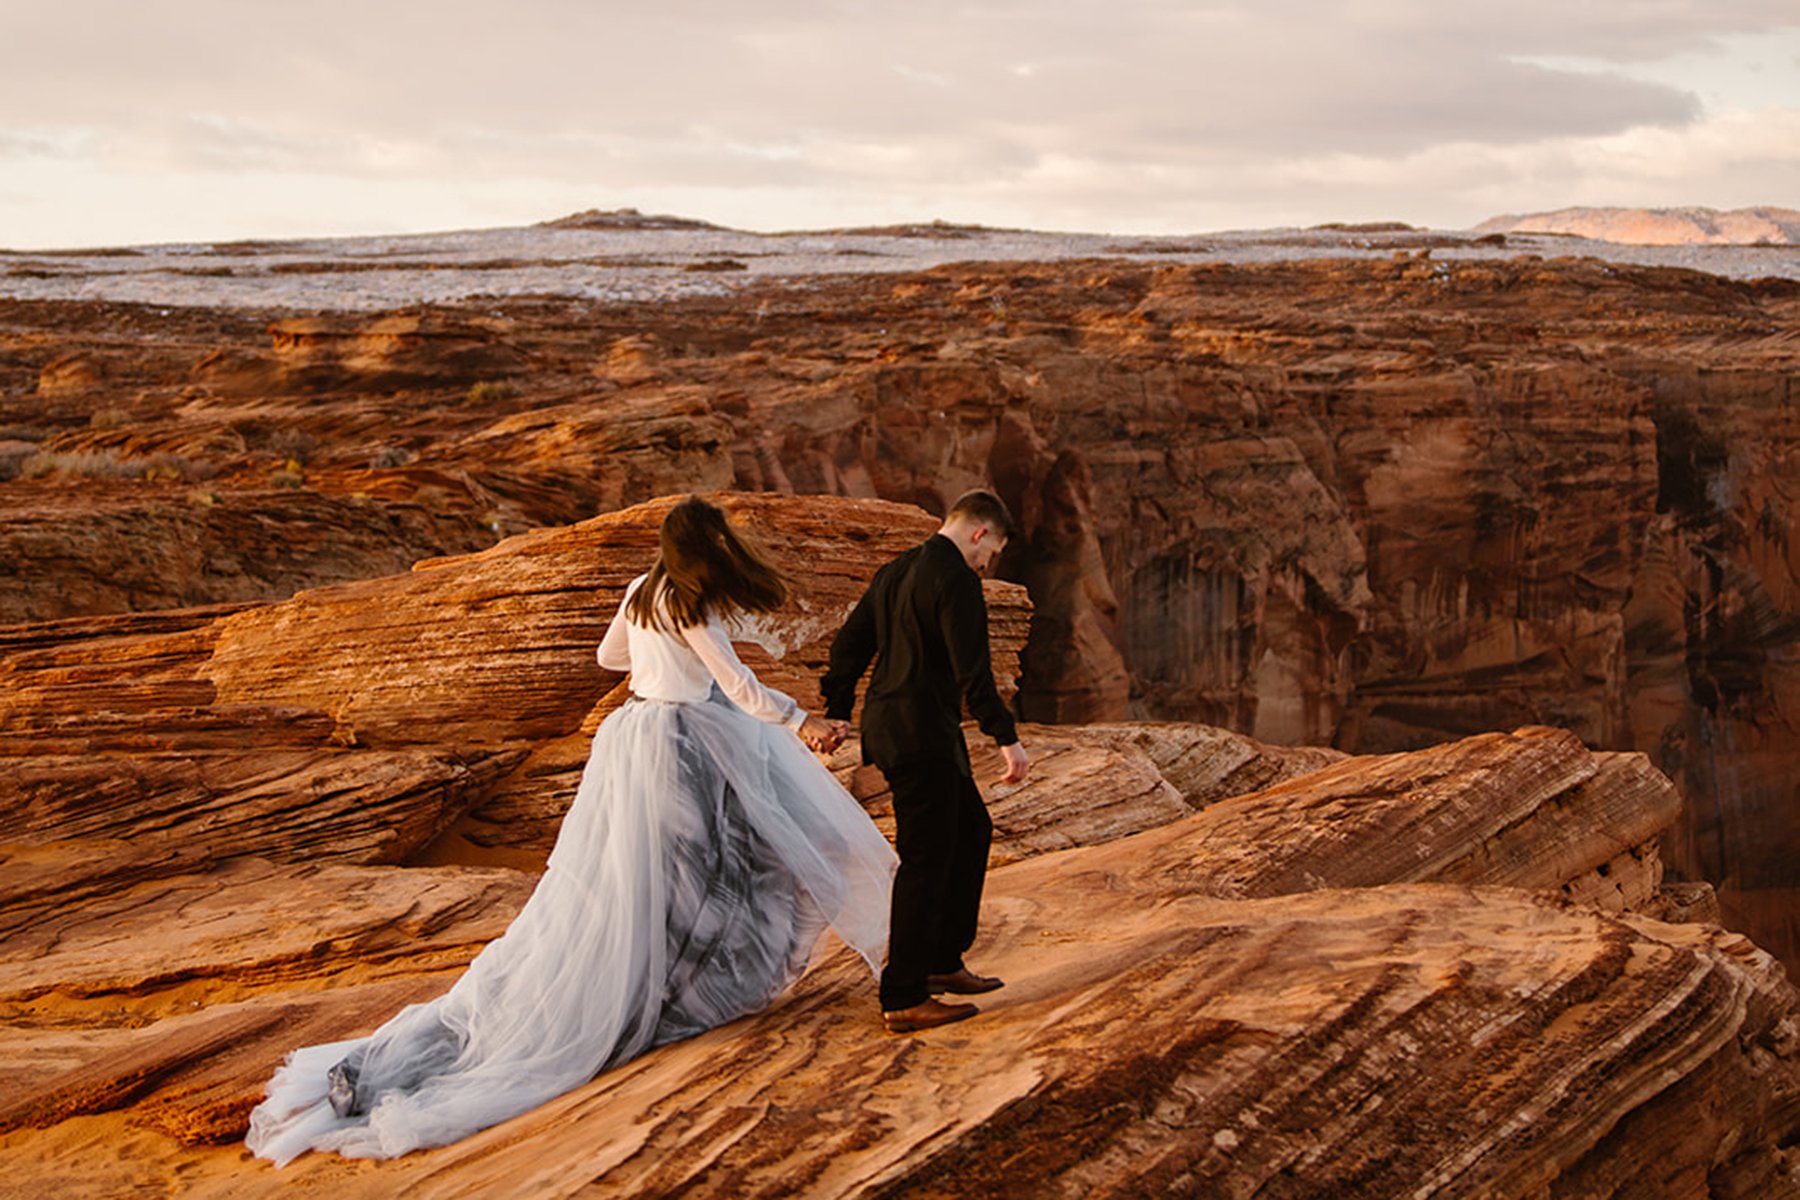 A couple walking on the orange cliffs in Arizona holding hands. Woman is wearing a dramatic blue painted tulle skirt.